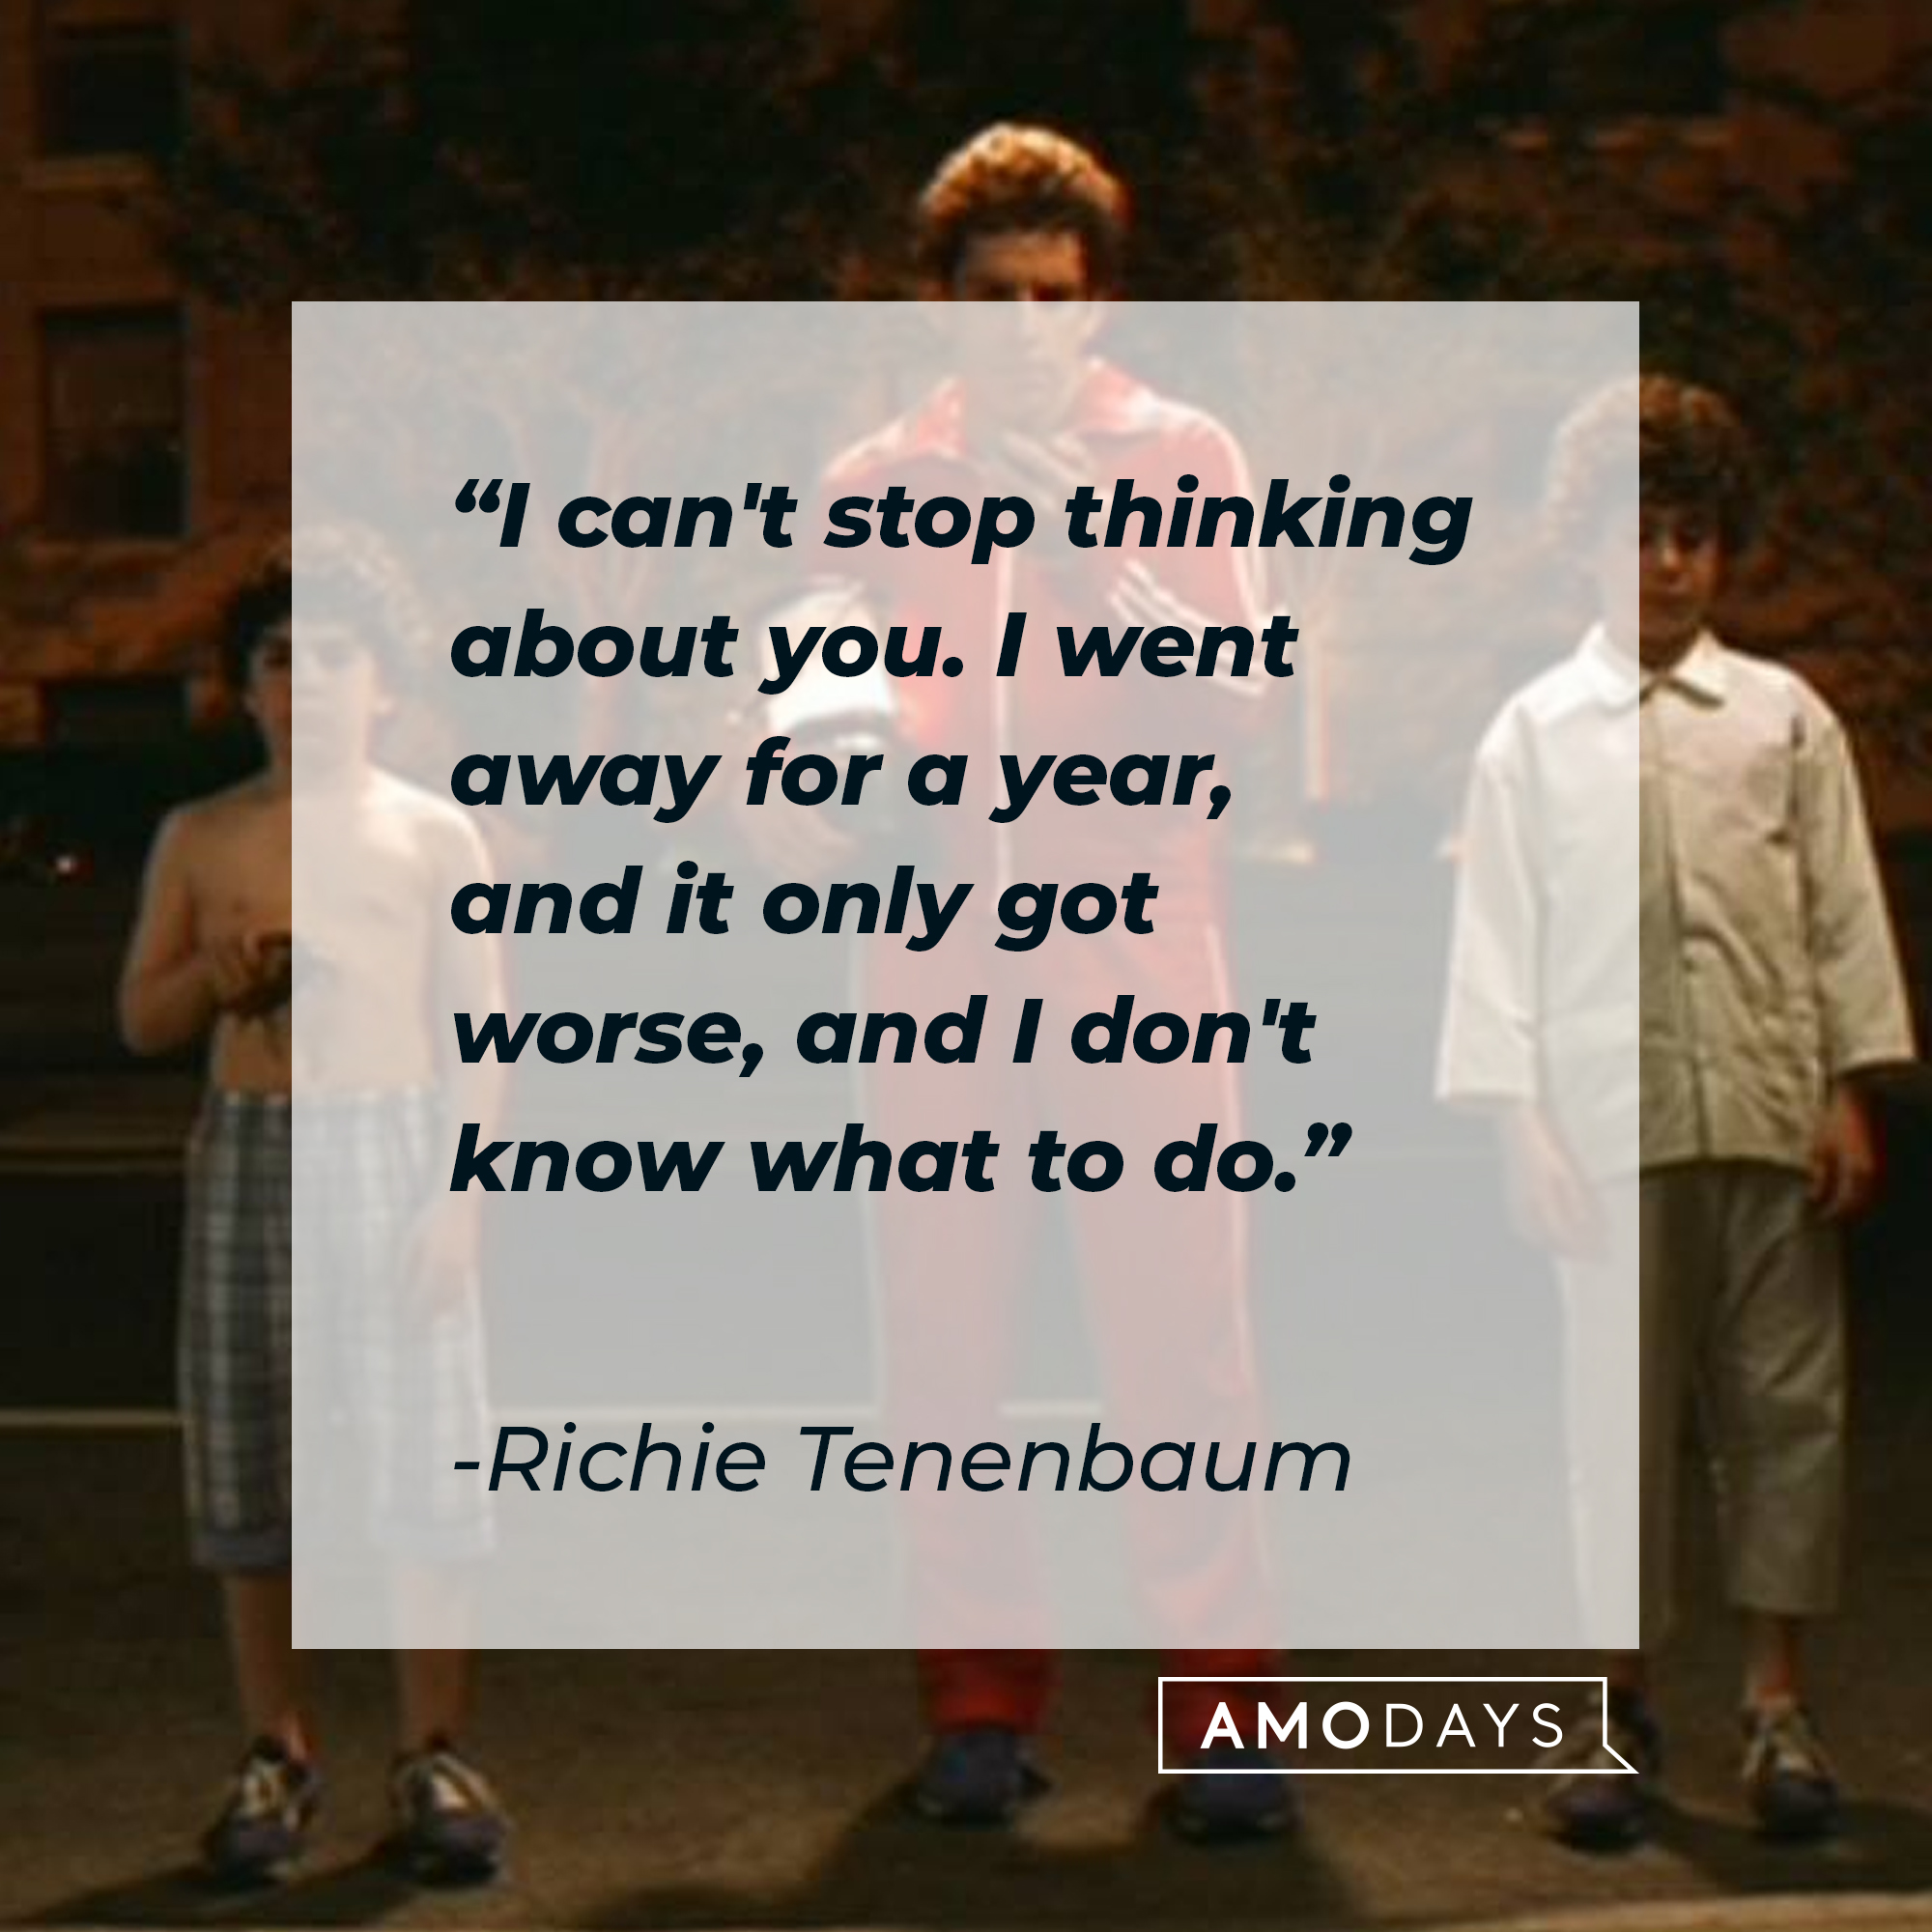 Richie Tenenbaum's quote: "I can't stop thinking about you. I went away for a year, and it only got worse, and I don't know what to do." | Image: AmoDays